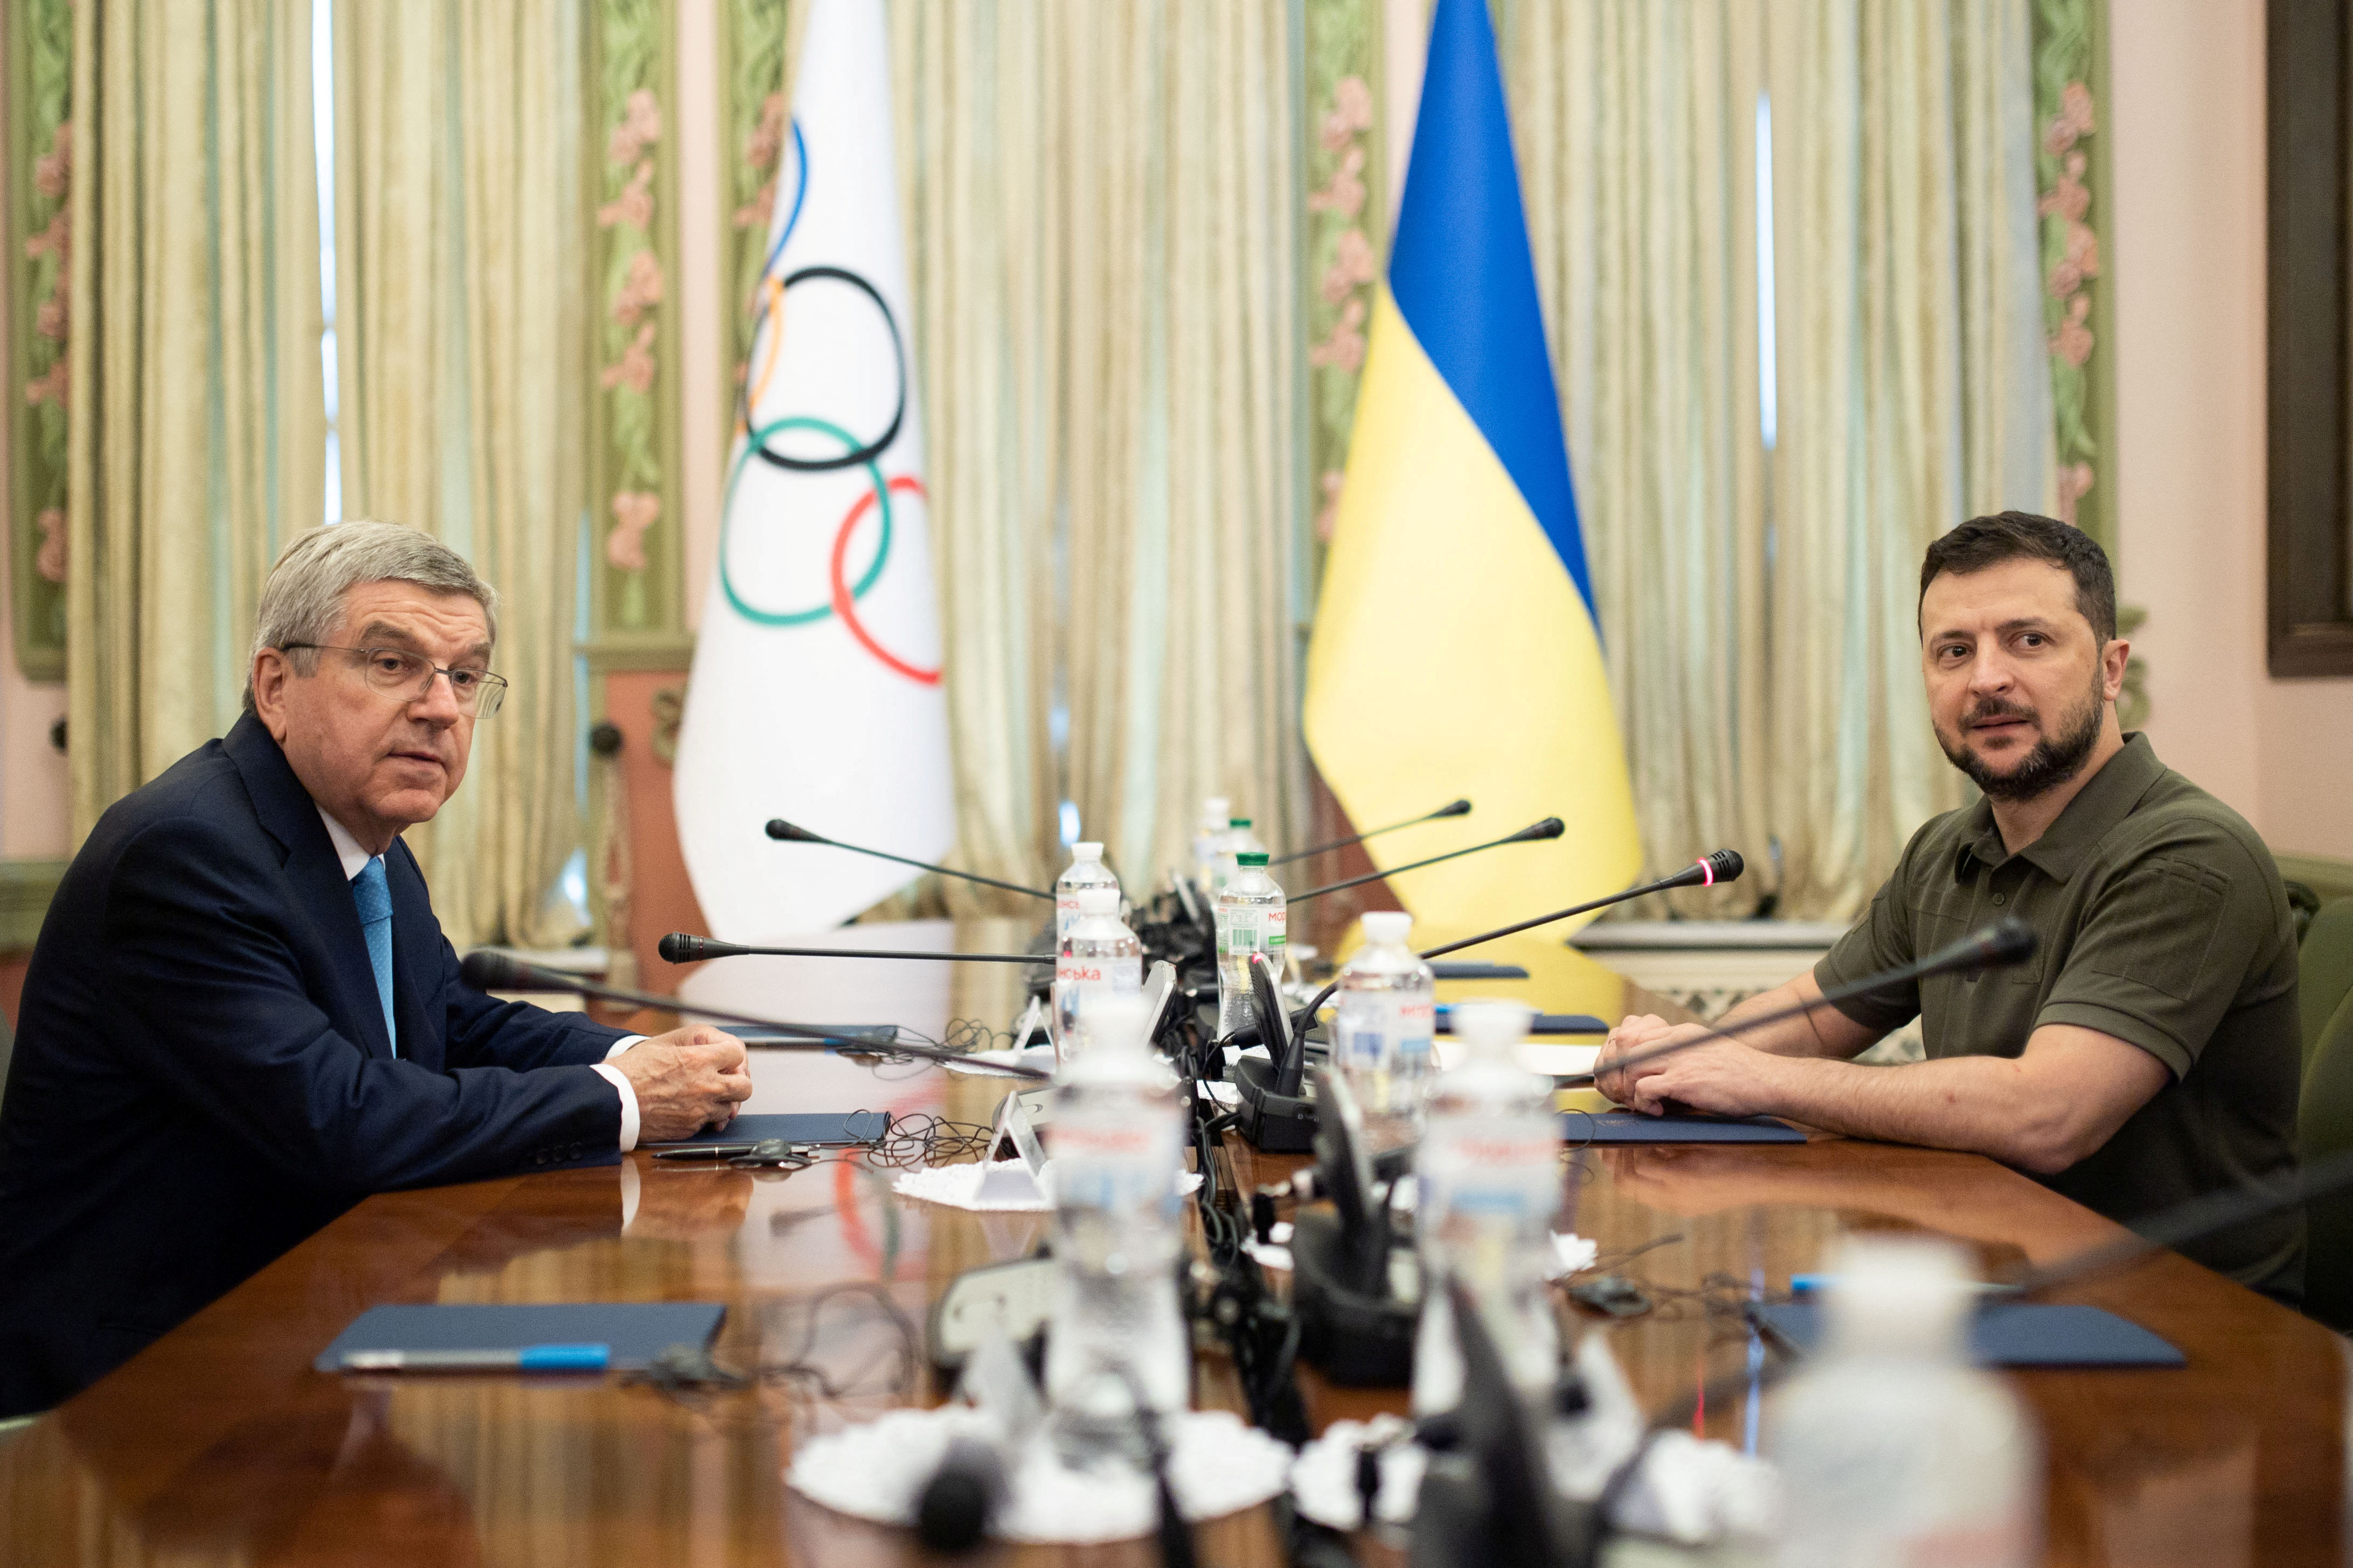 Ukrainian President Volodymyr Zelenskiy and President of the International Olympic Committee Thomas Bach attend a meeting, as Russia's attack on Ukraine continues, during a parliament session in Kyiv, Ukraine July 3, 2022. Ukrainian Presidential Press Service/Handout via REUTERS ATTENTION EDITORS - THIS IMAGE HAS BEEN SUPPLIED BY A THIRD PARTY.